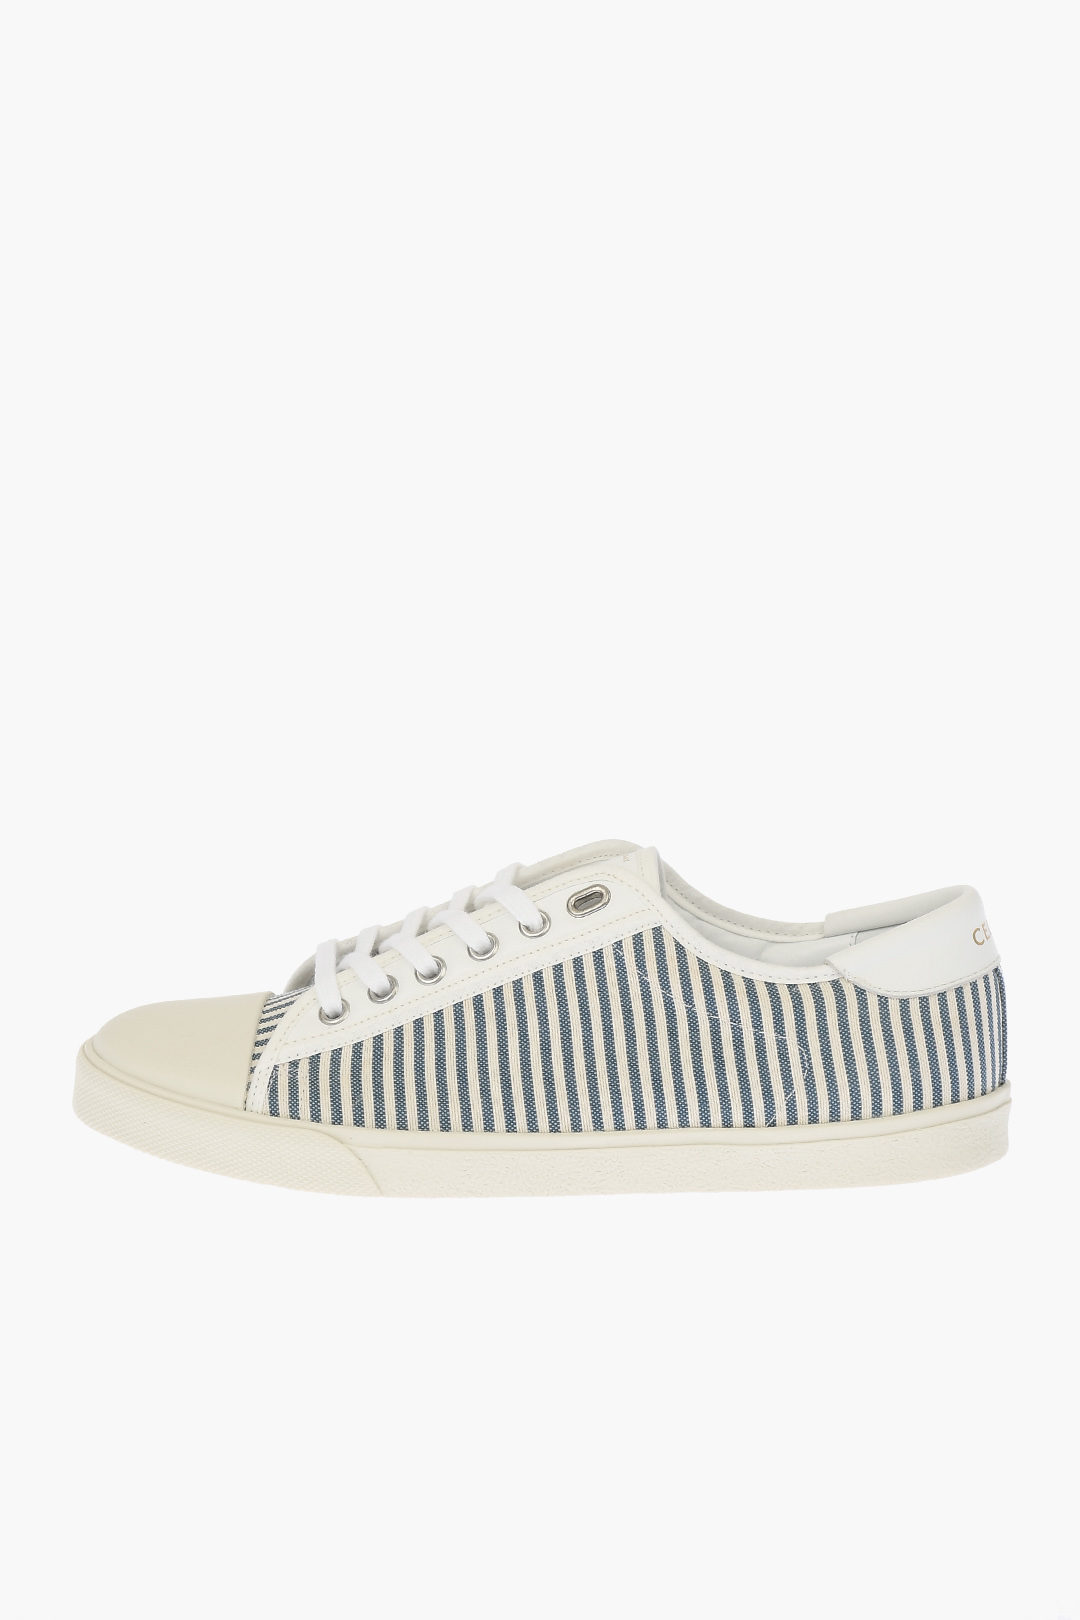 Simple striped low top canvas shoes classic men's and women's sneakers -  Shop BLESS SHOE Men's Casual Shoes - Pinkoi